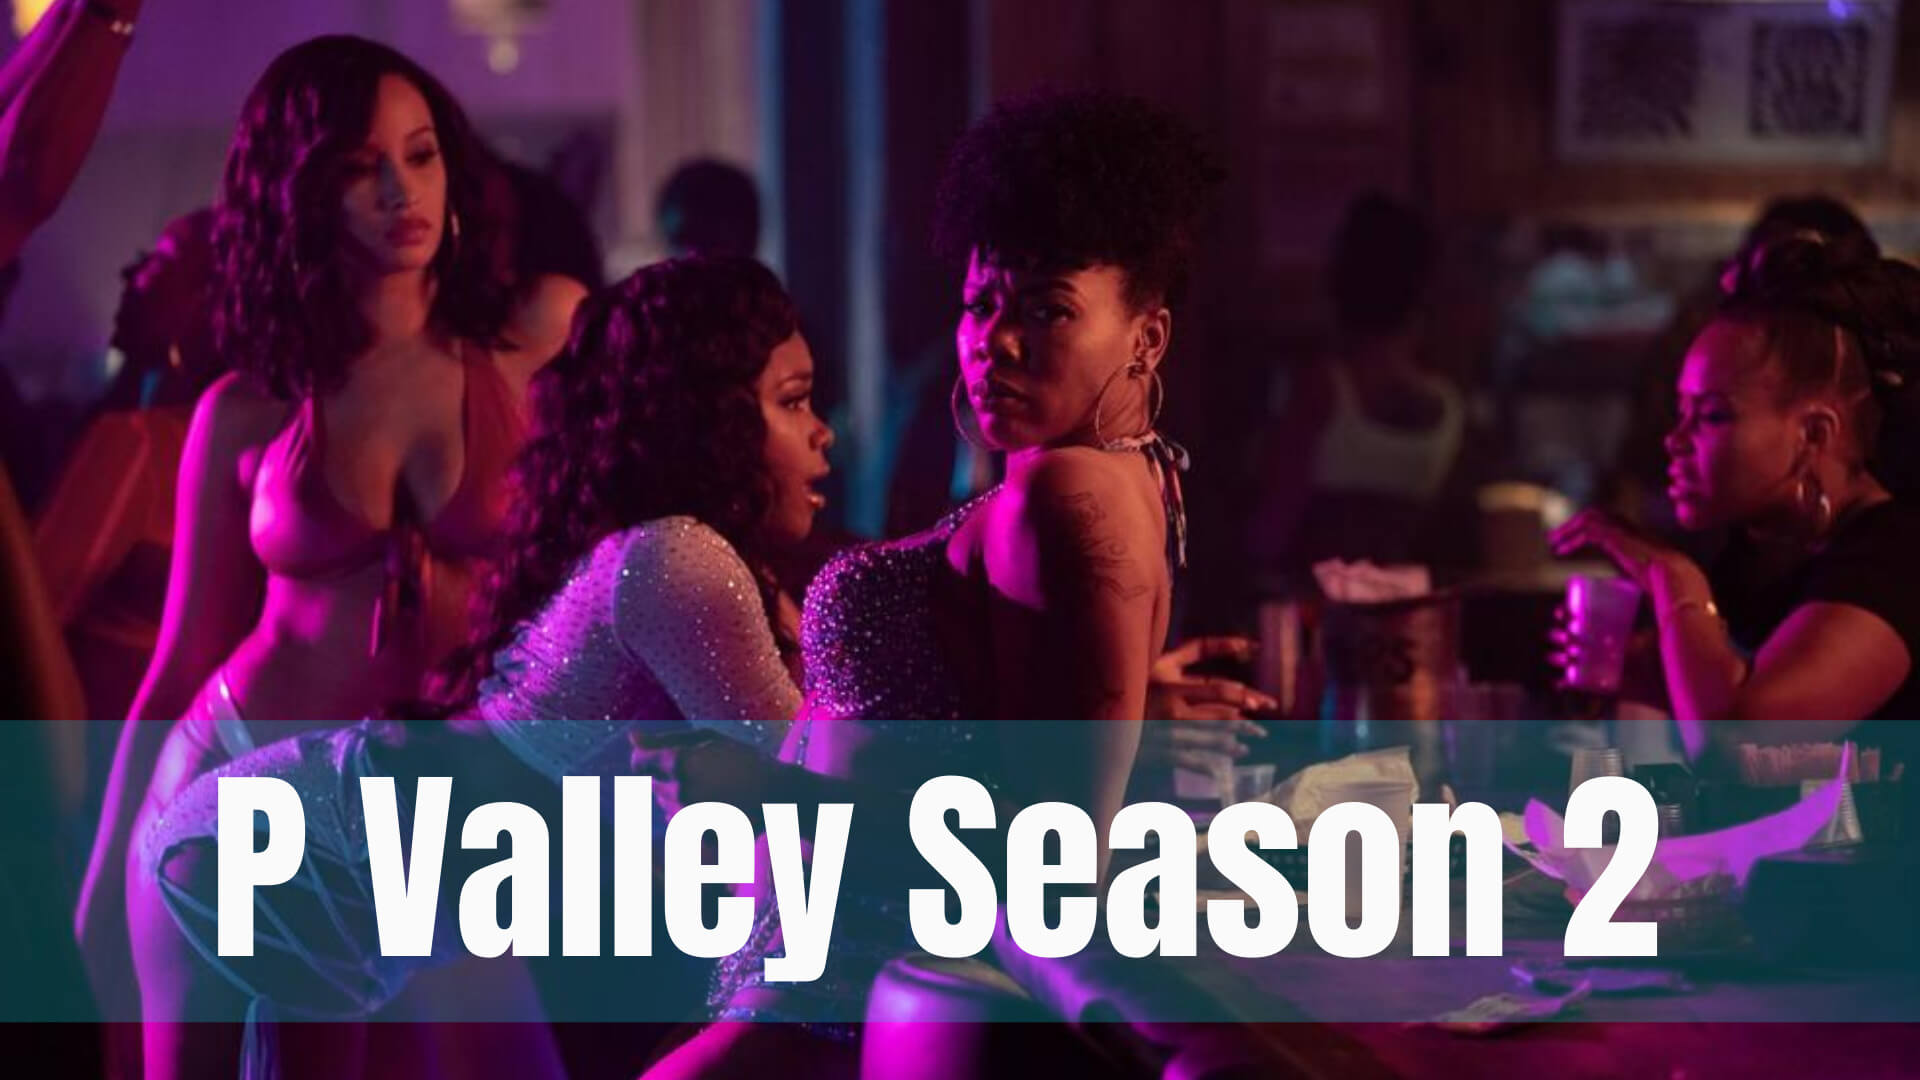 When Is P Valley Season 2 Coming Out? (Release Date